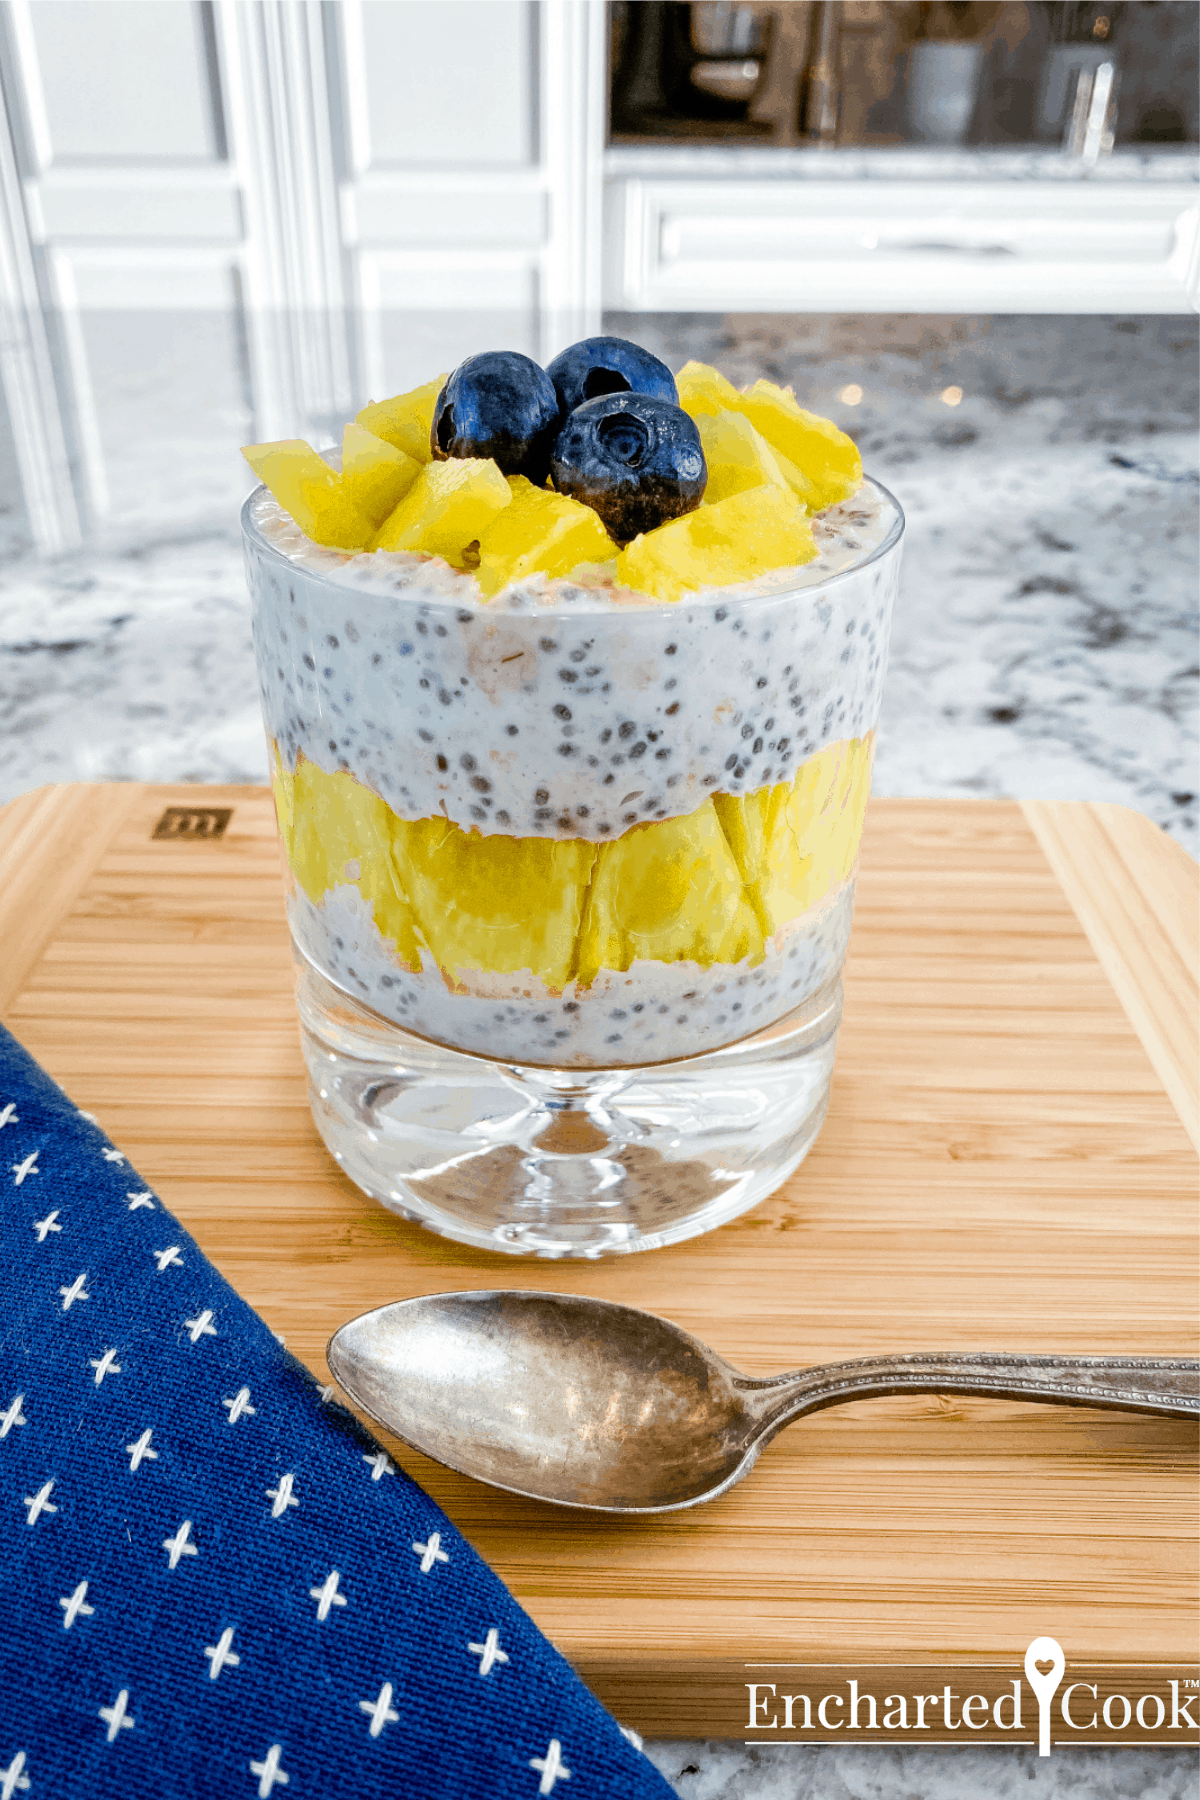 Pineapple layered with refrigerator oatmeal with a few blueberries.